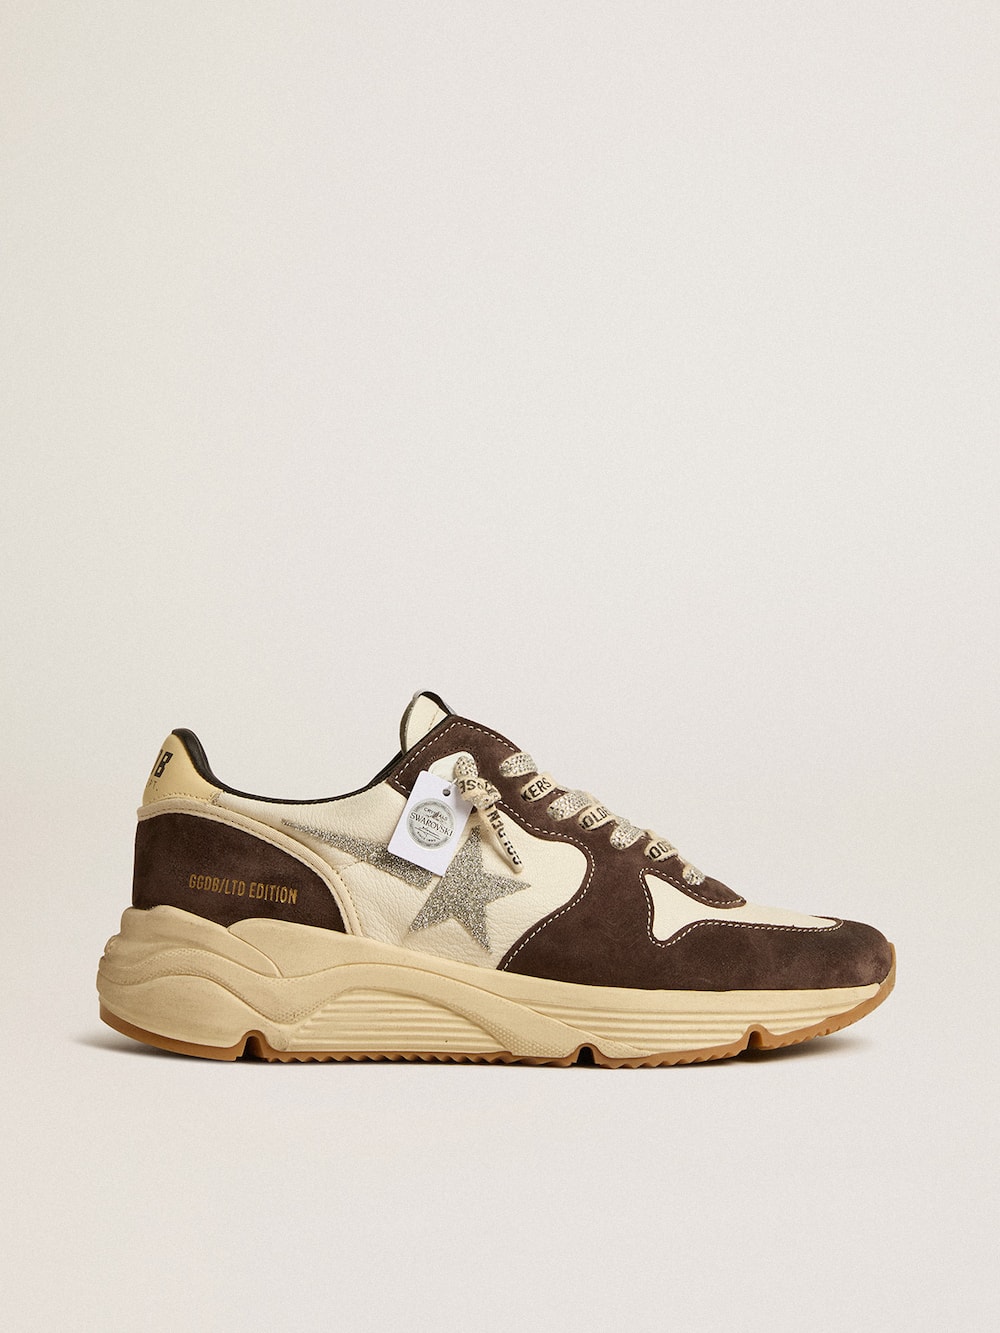 Golden Goose - Running Sole LTD in nappa and brown suede with a Swarovski crystal star in 